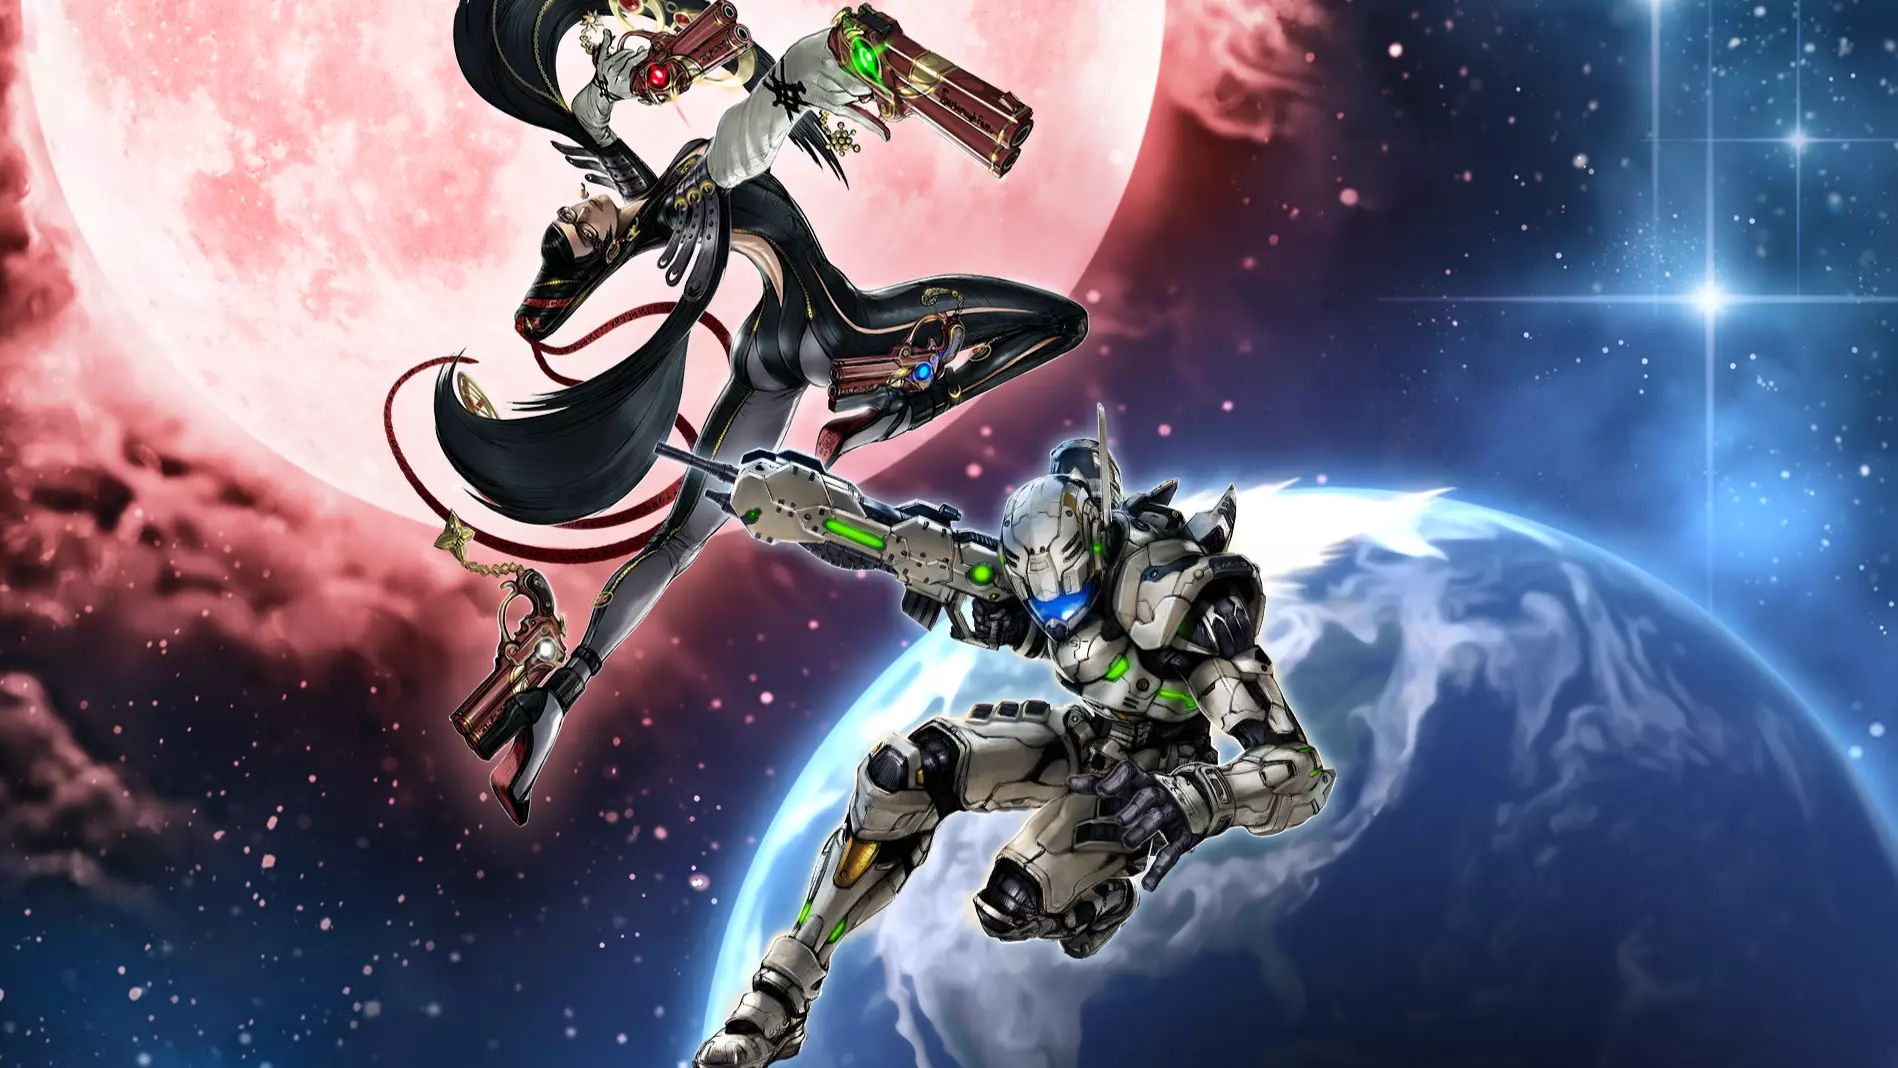 If You Love Video Games, You Need To Play ‘Vanquish’ And ‘Bayonetta’